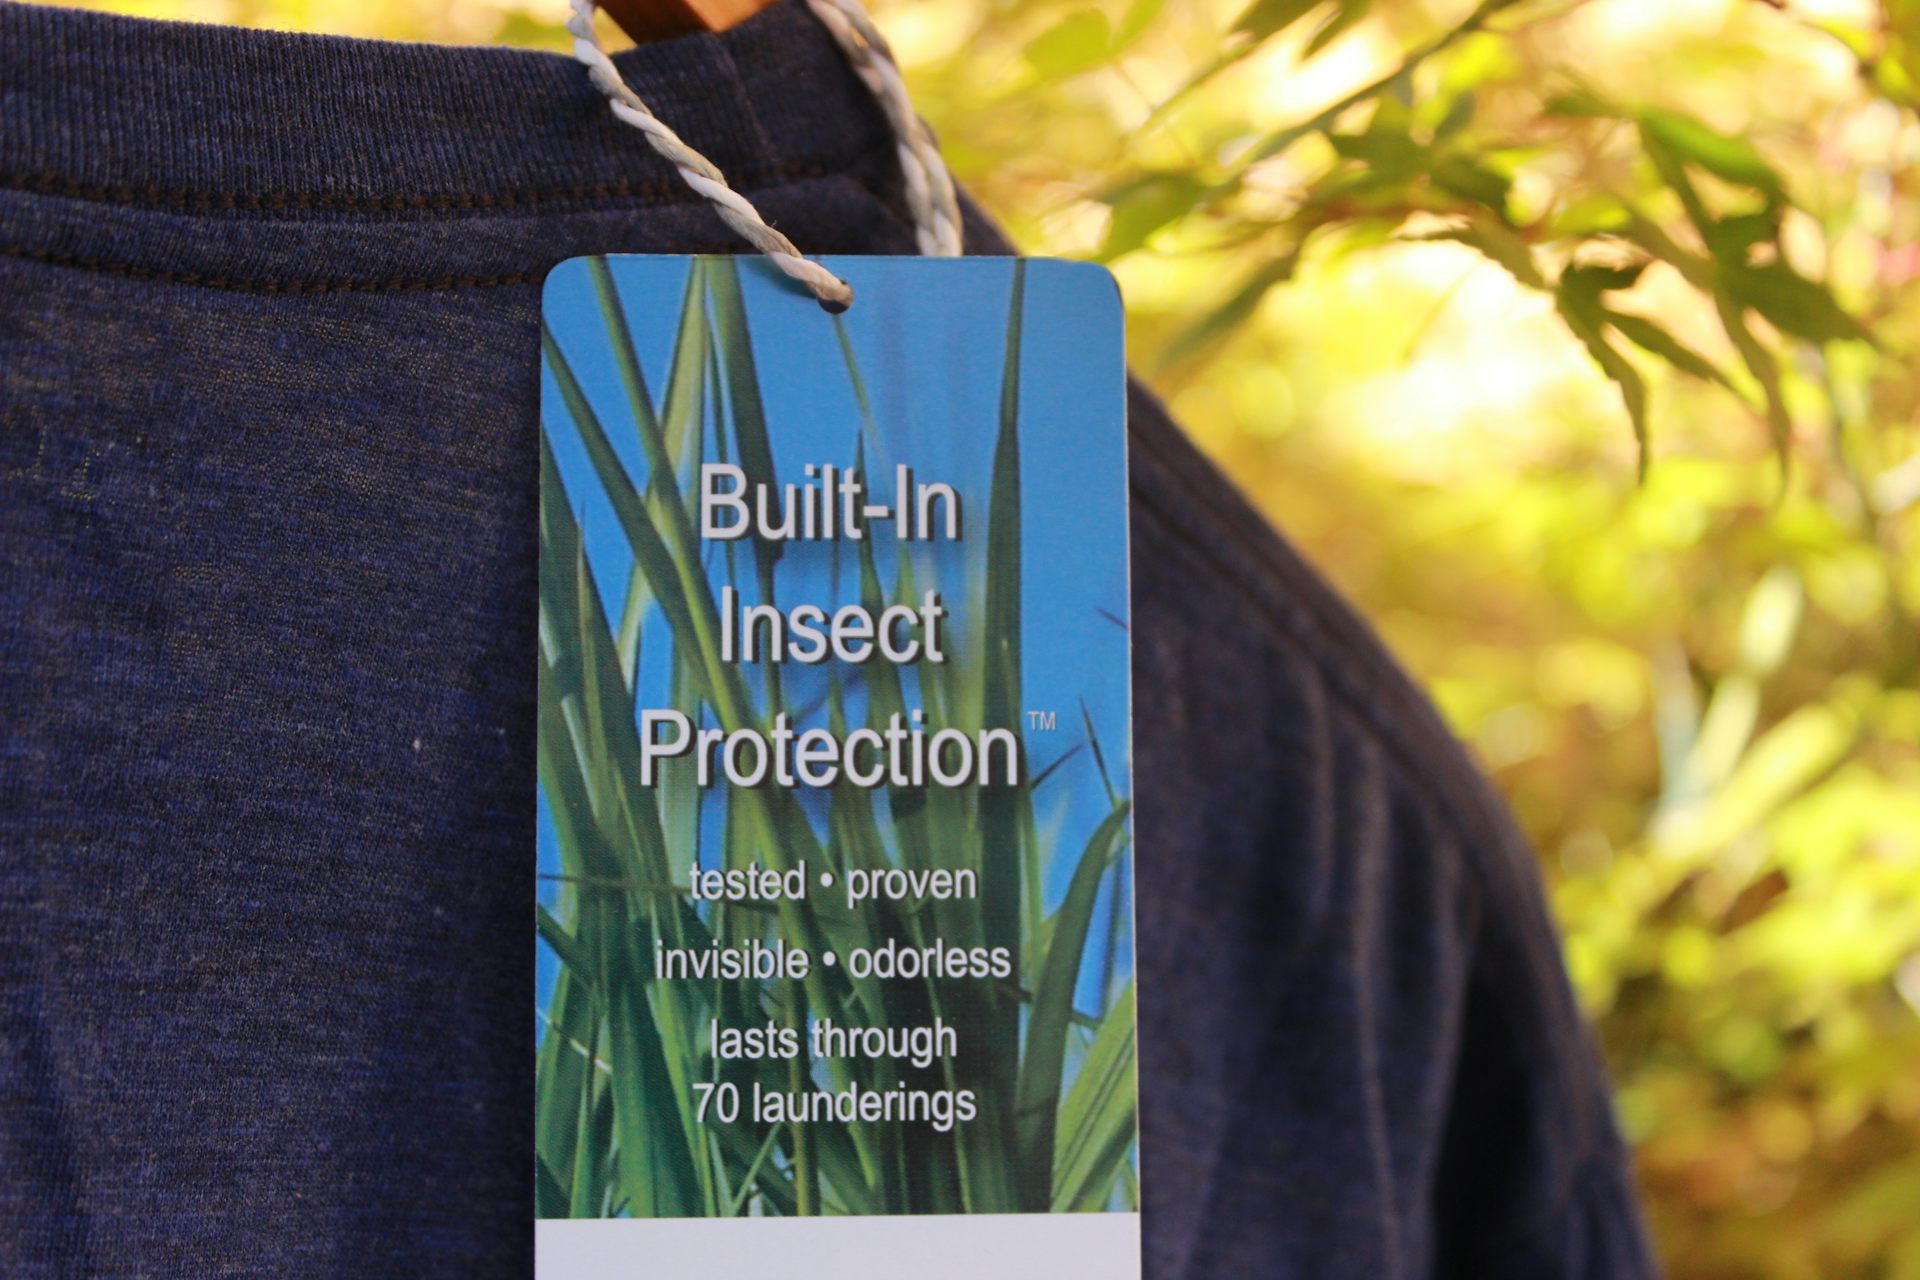 Mozzie repellent clothing might stop 